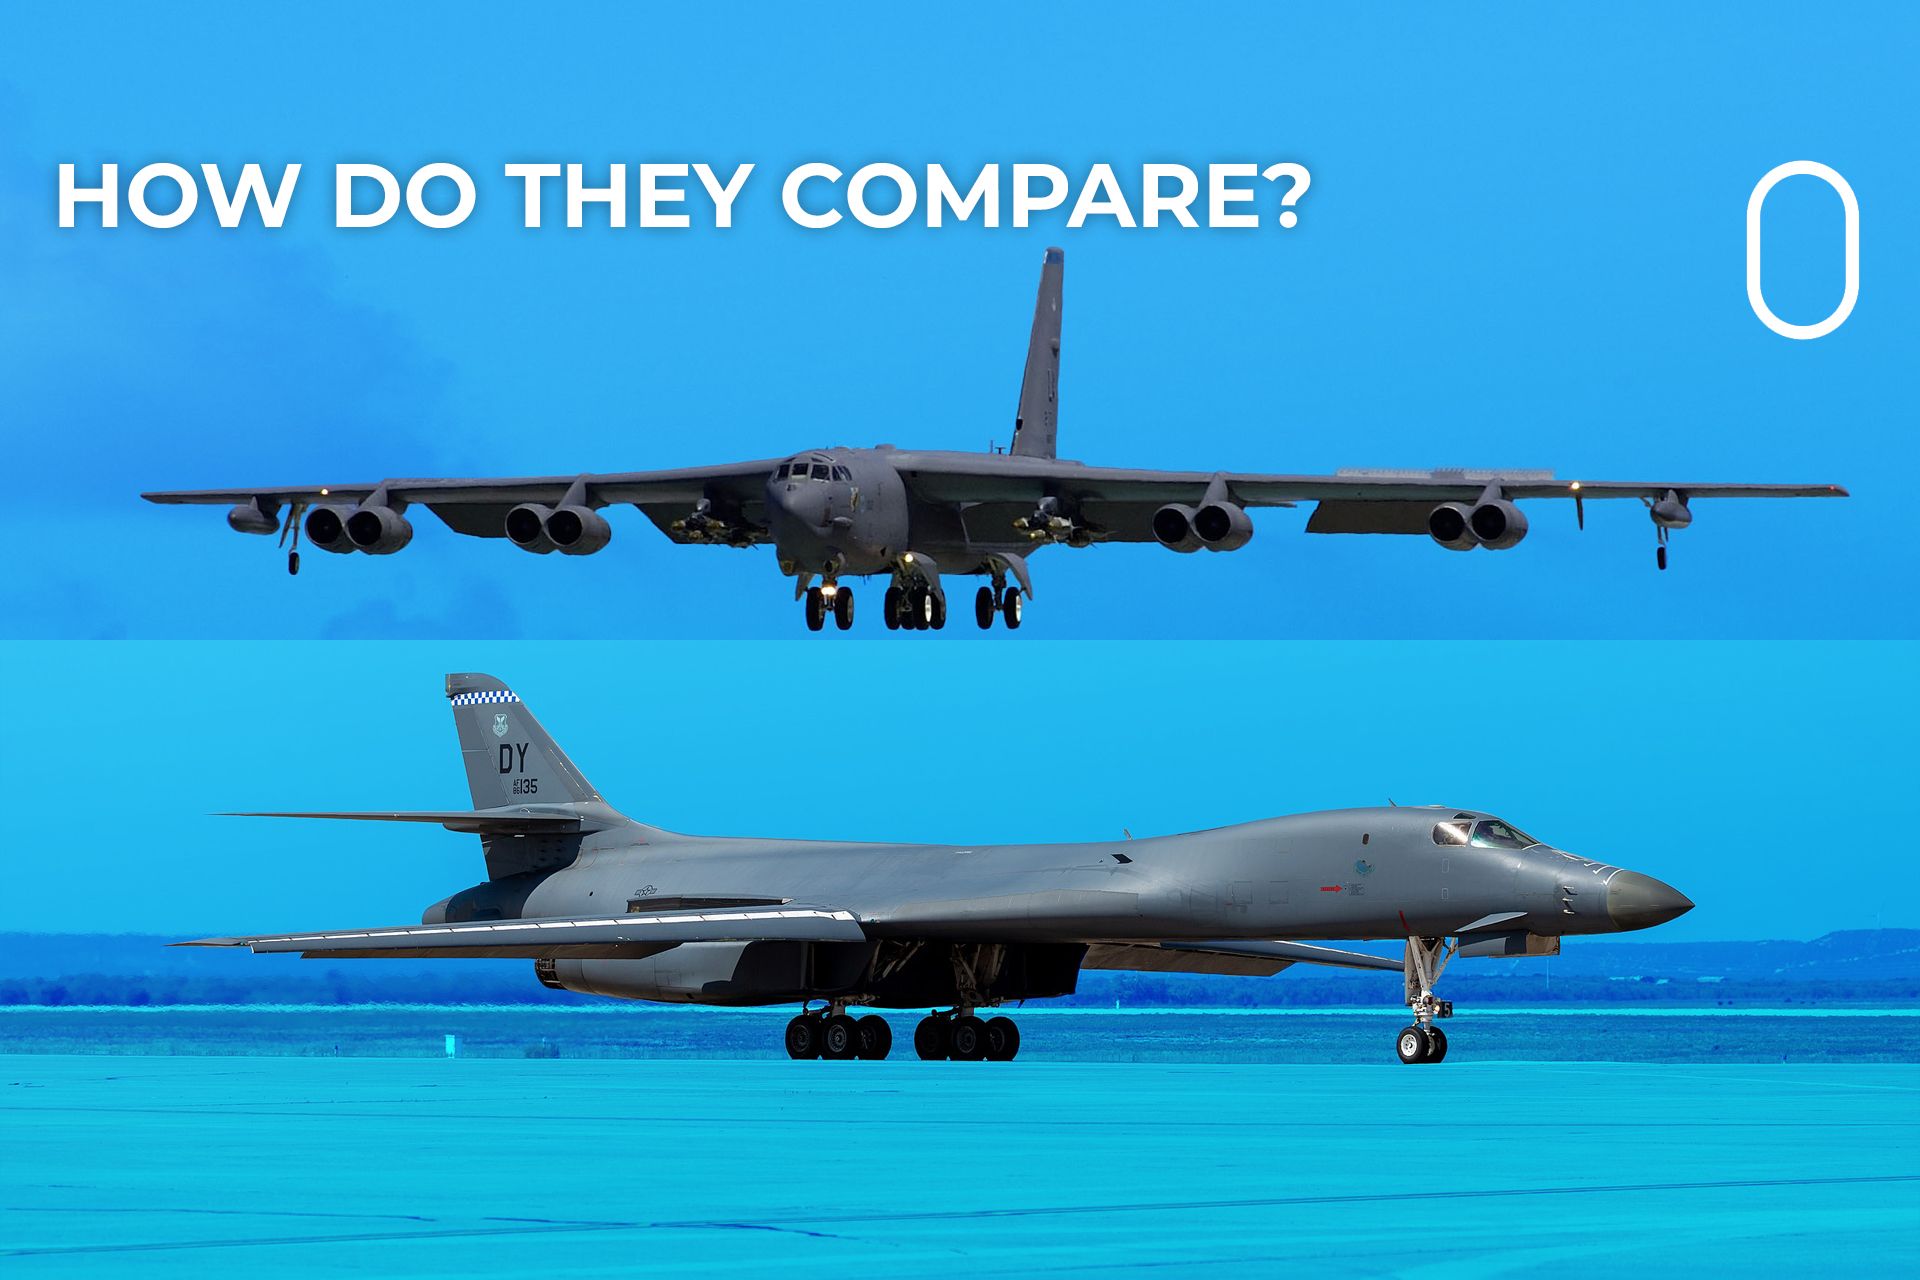 Battle Of The Bombers: Boeing B-52 Stratofortress Vs Rockwell B-1